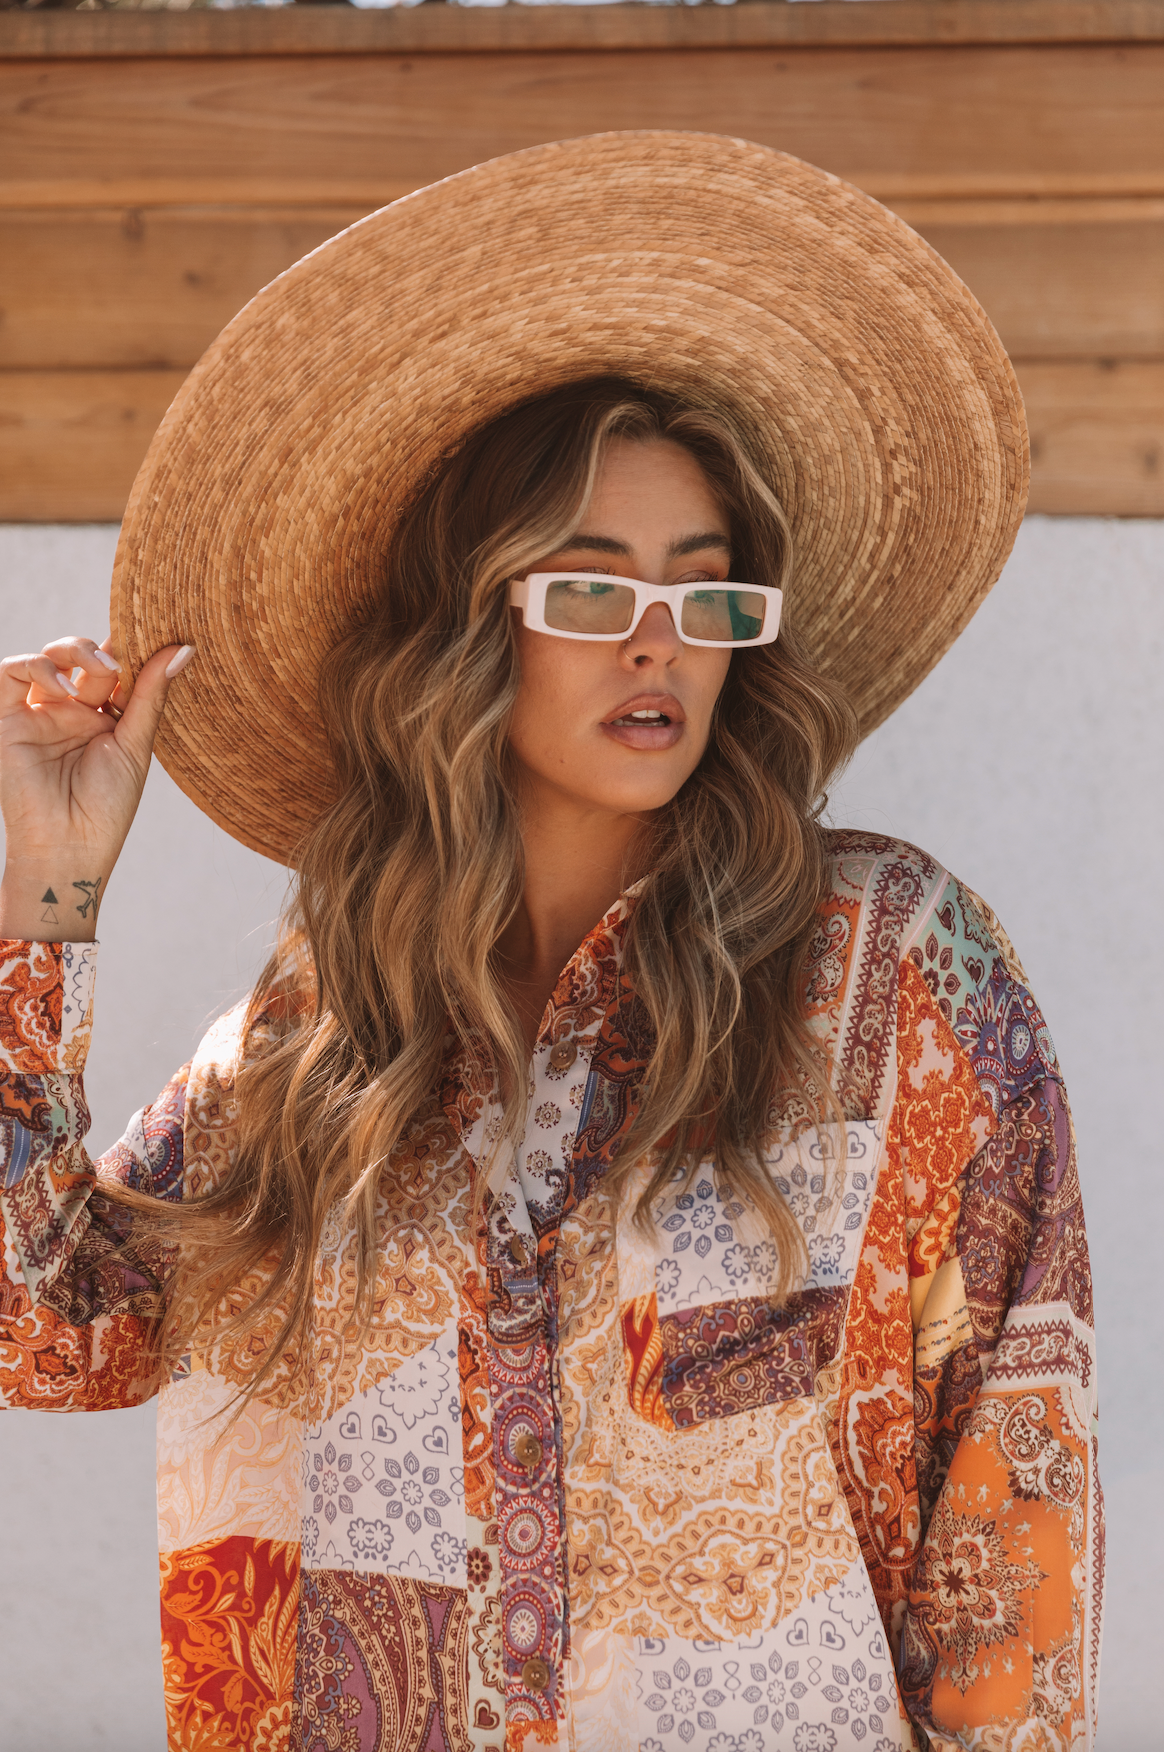 The Chic Micro Sunnies